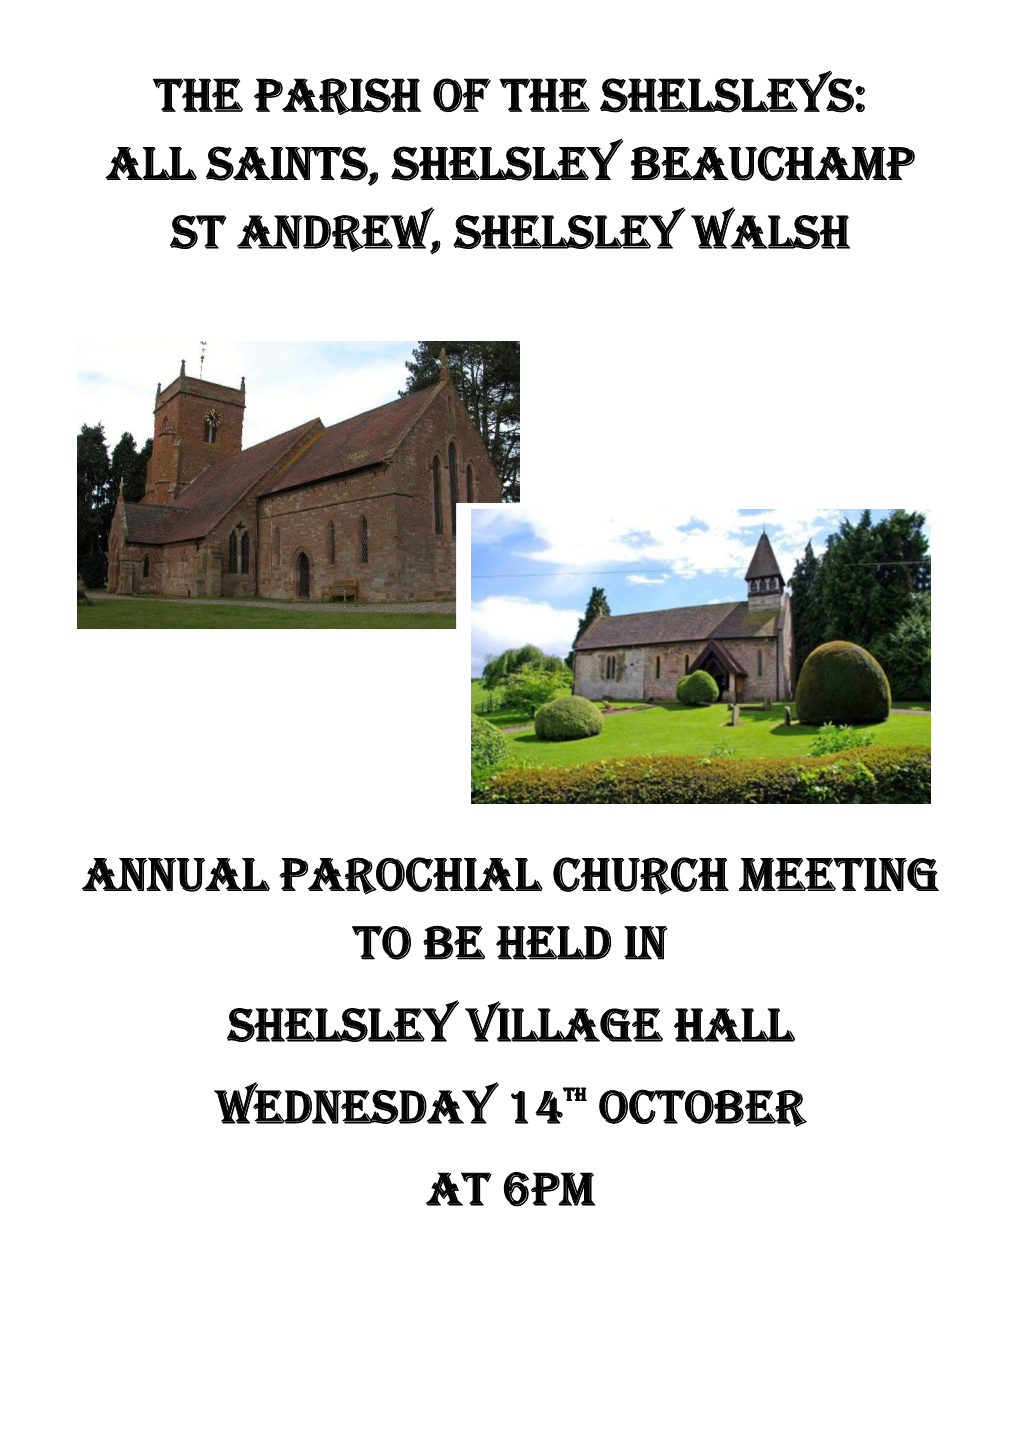 The Parish of the Shelsleys: All SAINTS, SHELSLEY BEAUCHAMP ST ANDREW, SHELSLEY WALSH Annual Parochial Church Meeting to Be Held